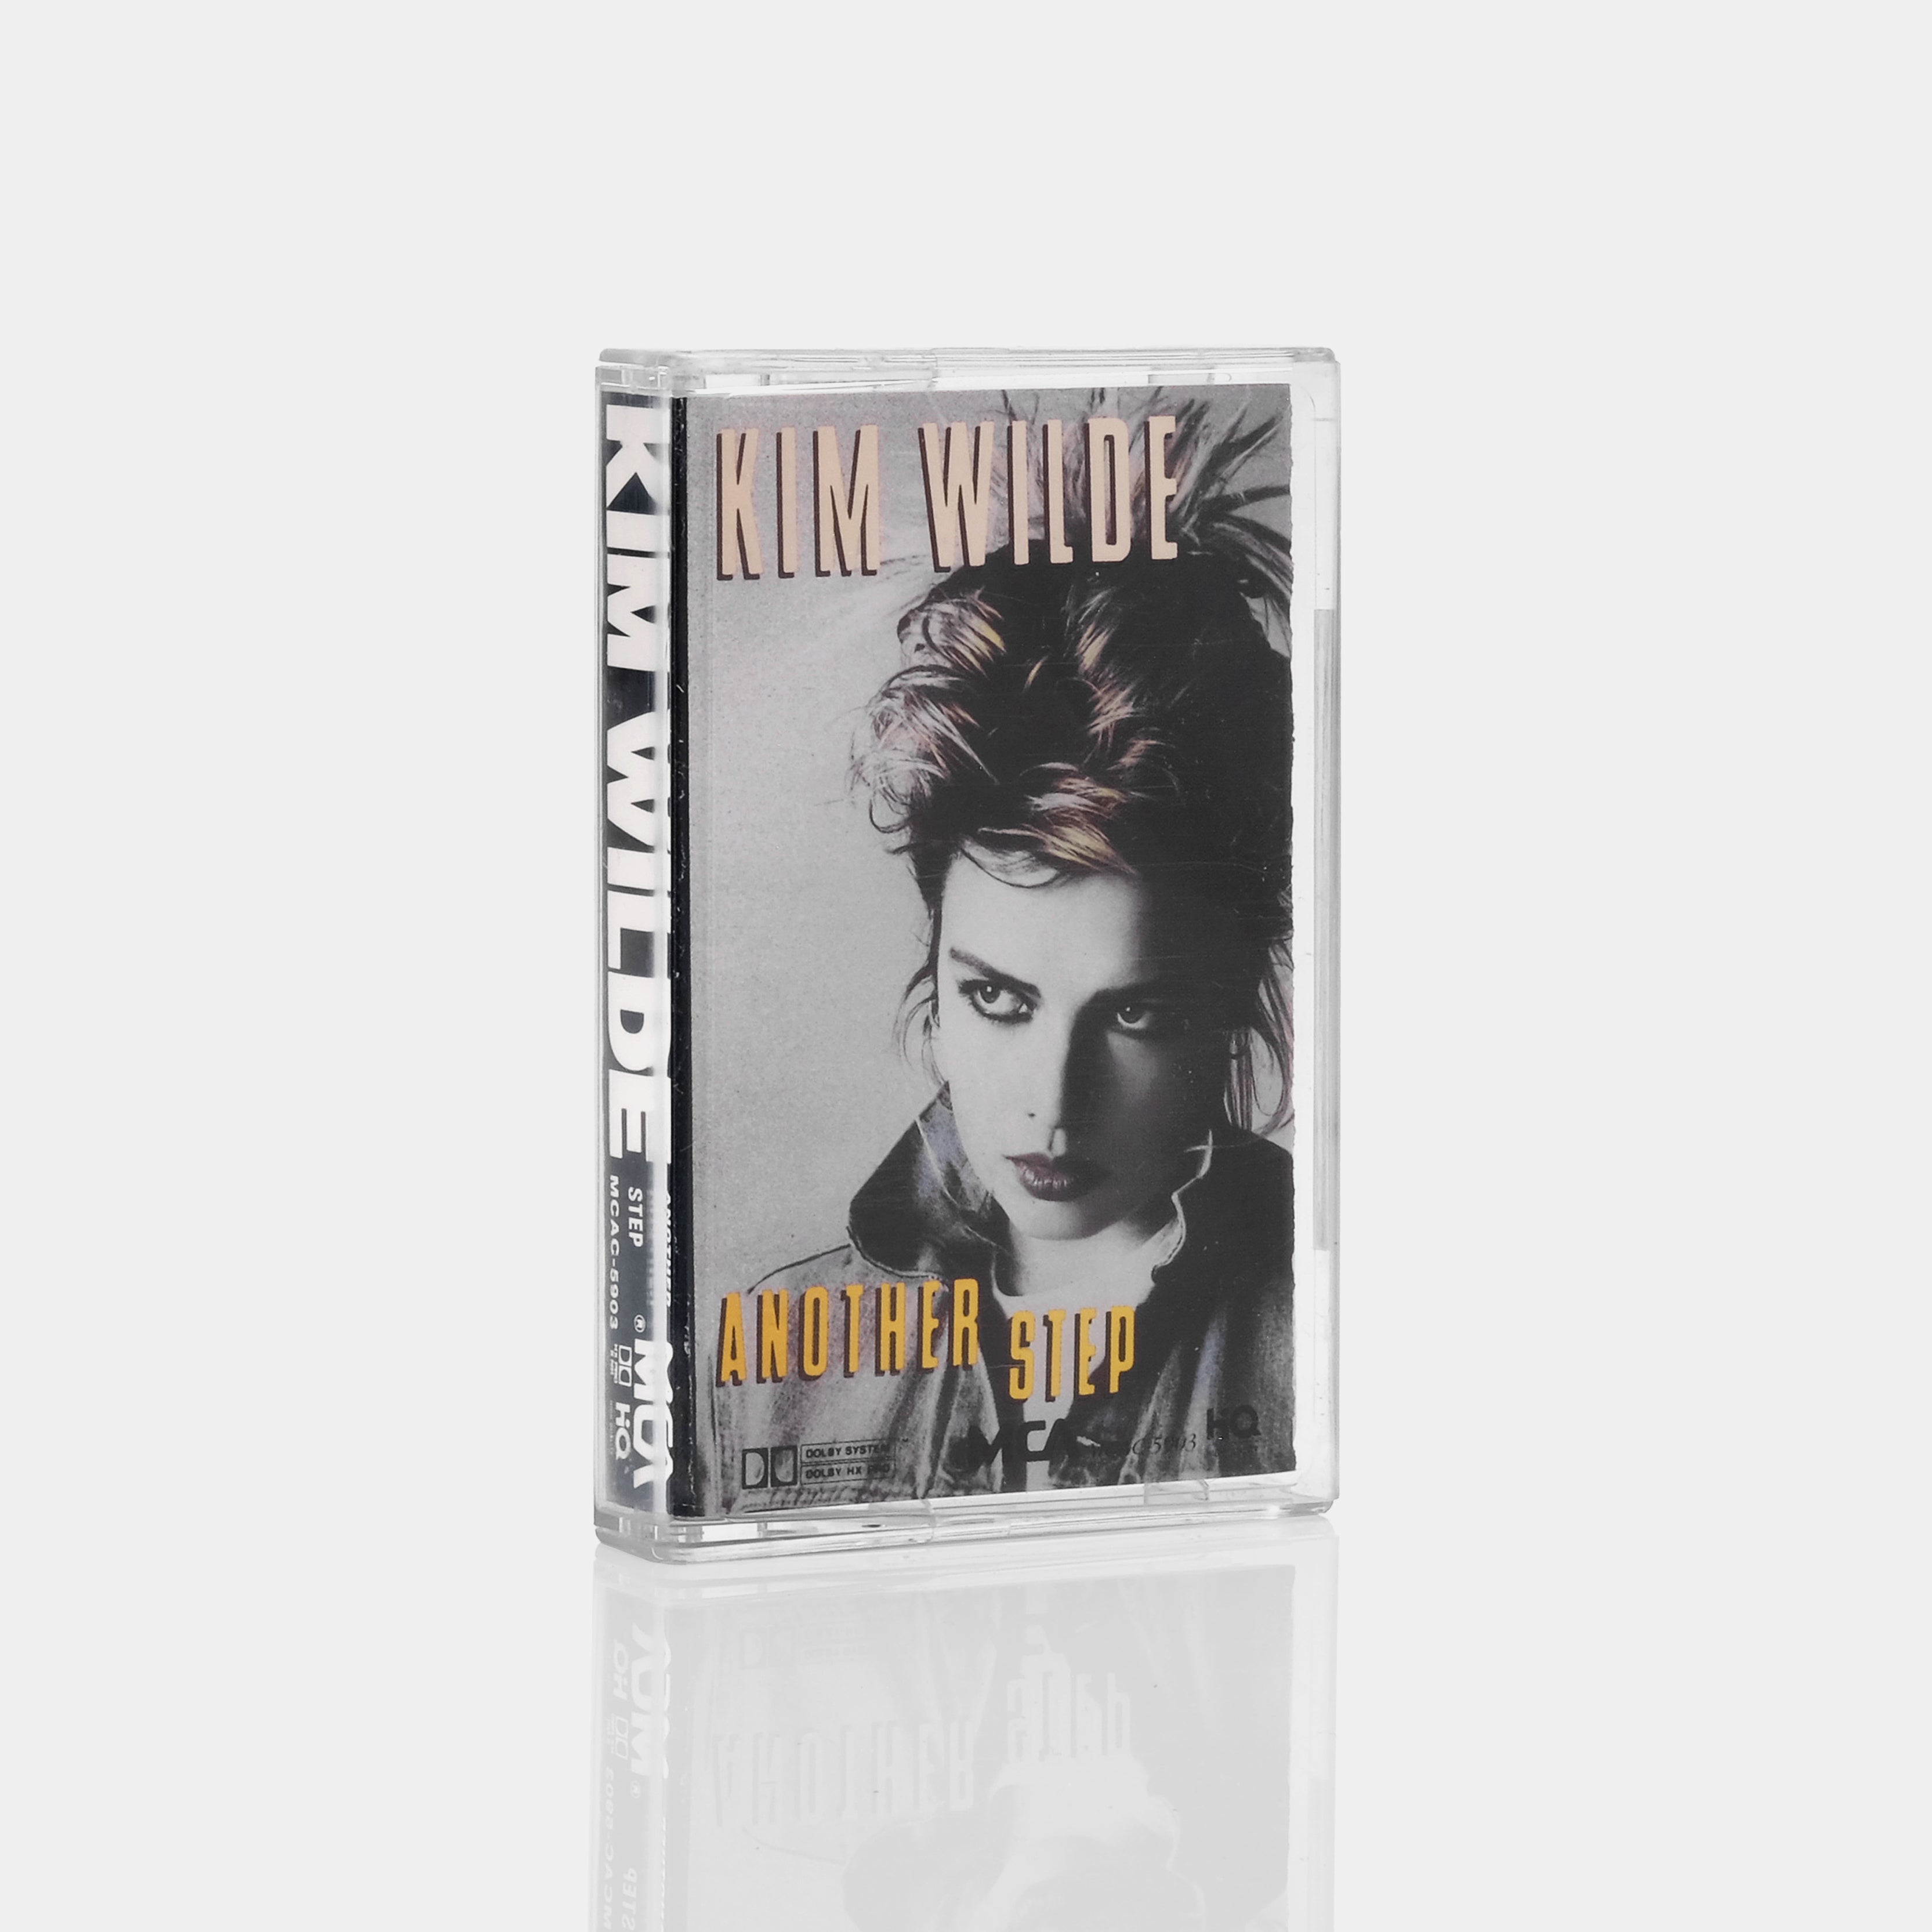 Kim Wilde - Another Step Cassette Tape